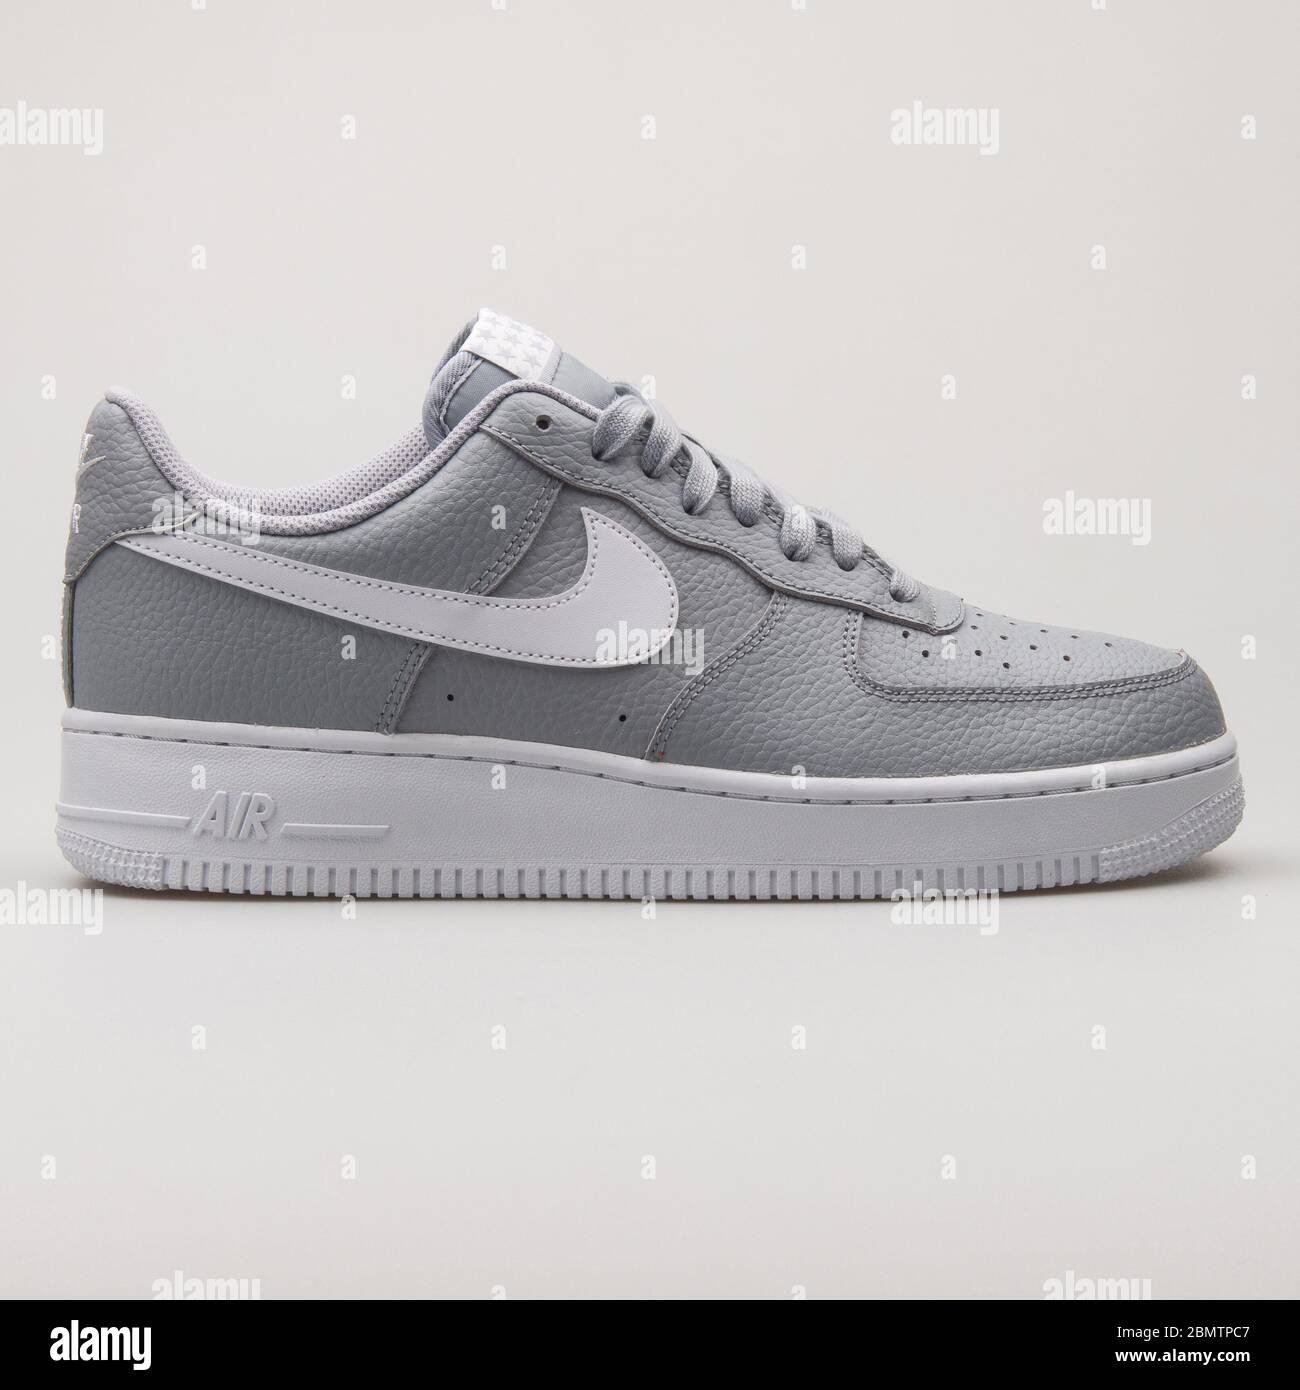 Air Force 1 Gris Flash Sales, 59% OFF | www.velocityusa.com